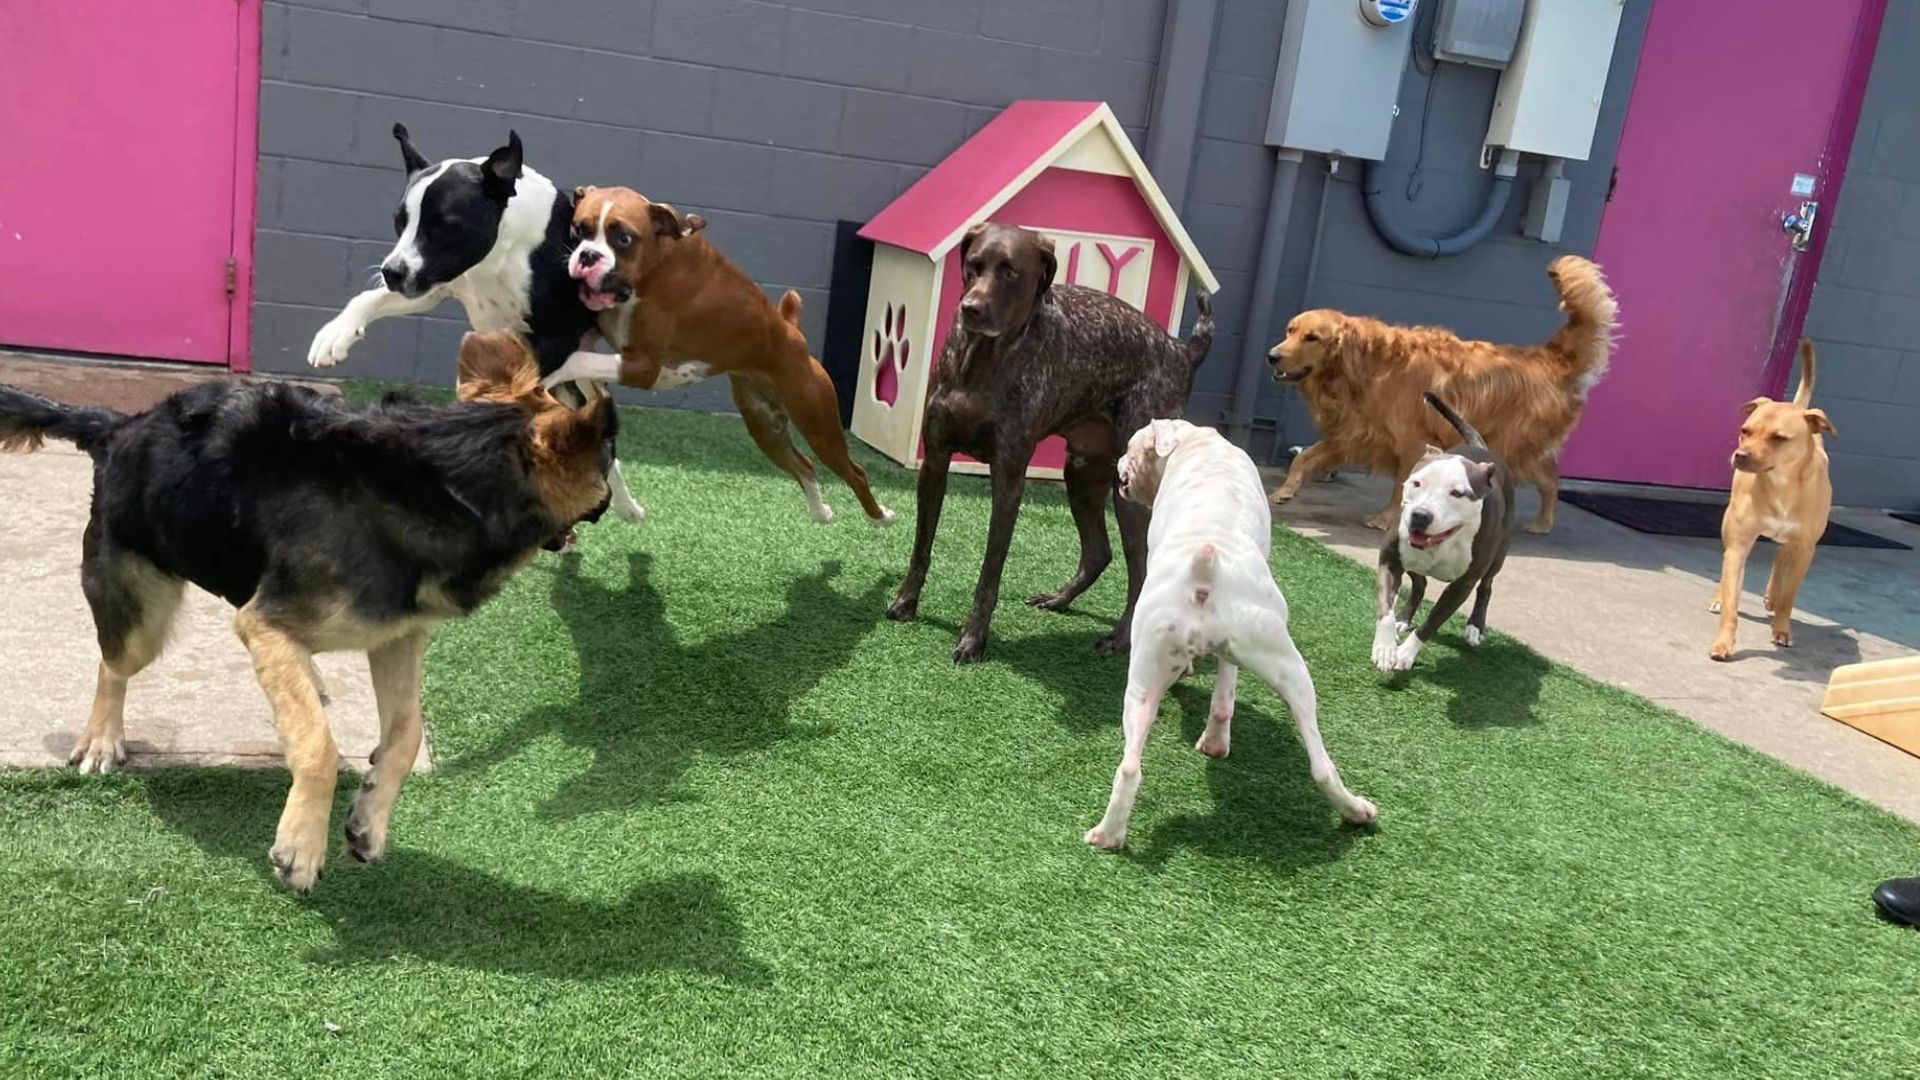 Capture the joy and energy of our Doggy Daycare Play Zone in this vibrant photo featuring a group of lively pups enjoying their playtime. This area, designed with safety and fun in mind, is the perfect spot for dogs of all sizes to romp and socialize under careful supervision, ensuring they return home happy and tired.